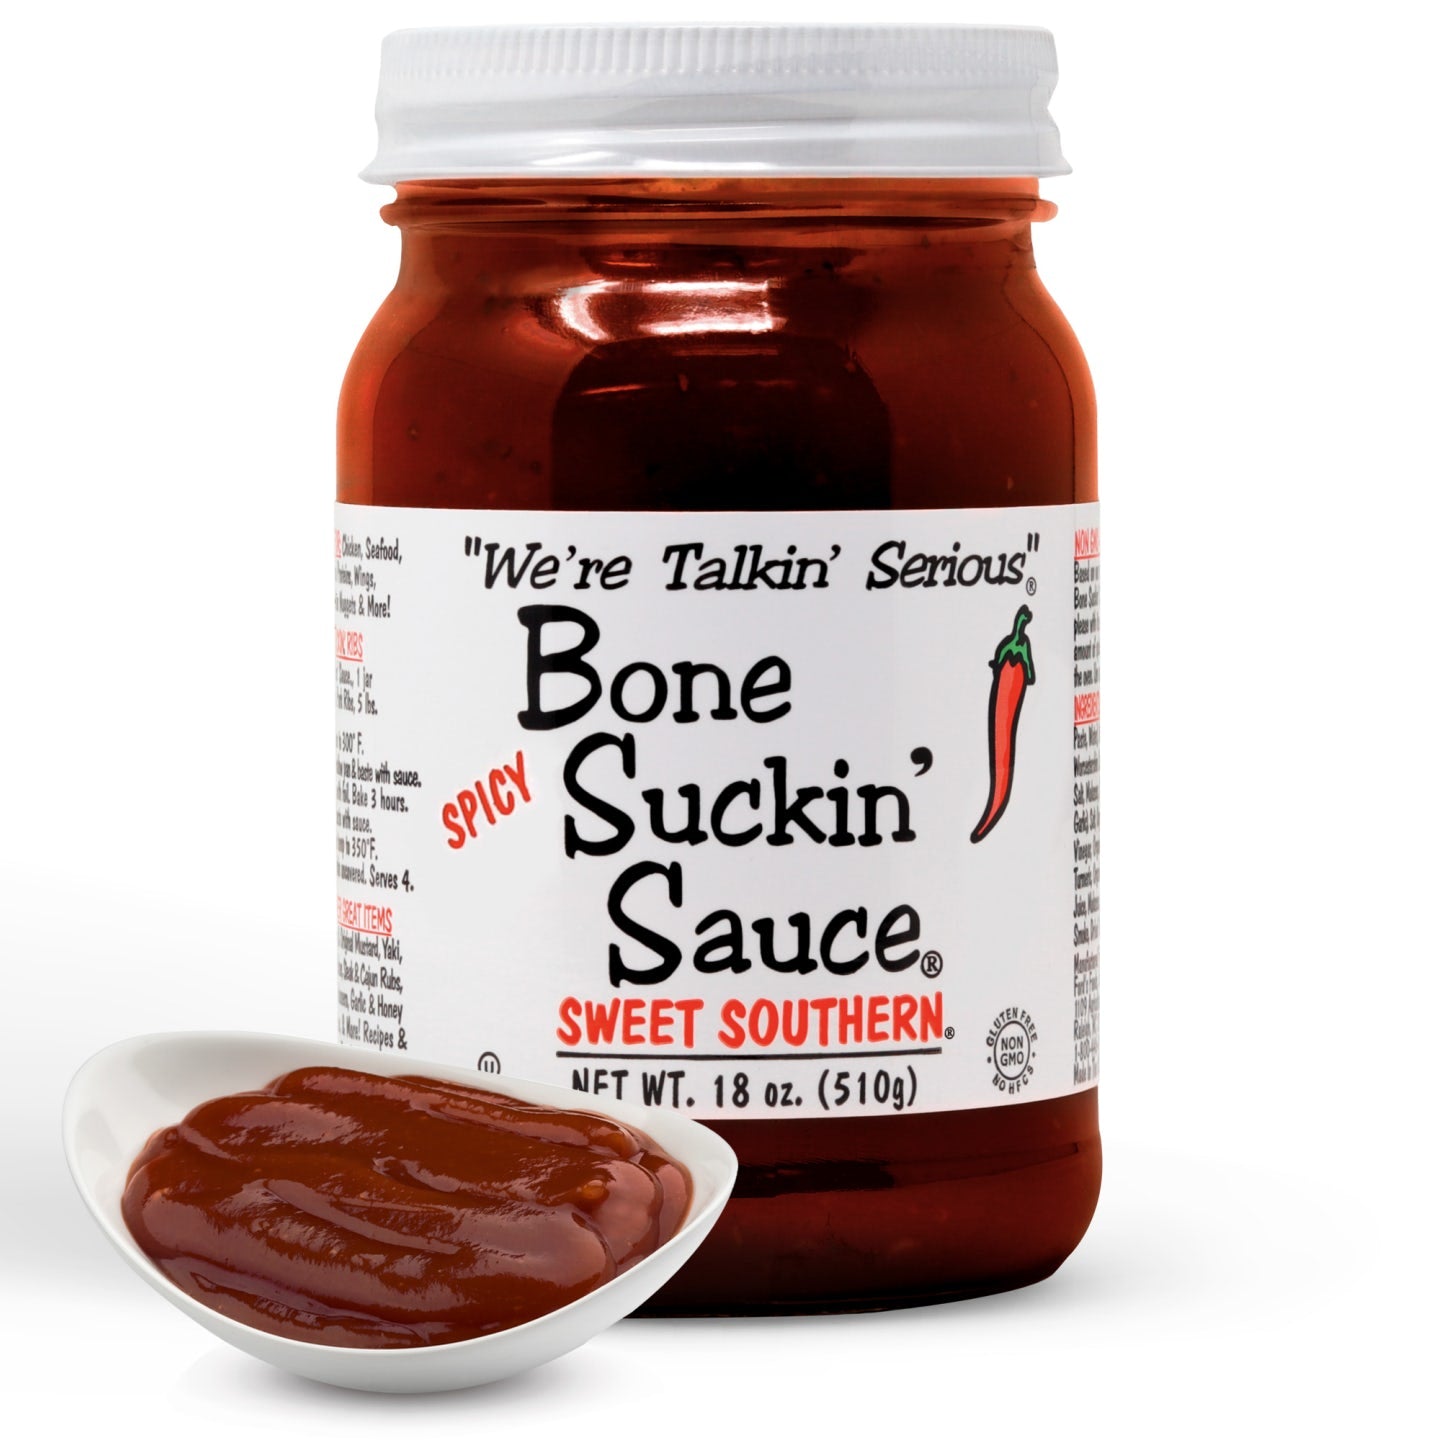 Bone Suckin' Sauce® Spicy Sweet Southern® BBQ Sauce - We took the Original Bone Suckin' Sauce® and added a bit of cayenne pepper to get an amazing flavor and heat with the Spicy Bone Suckin' Sauce®. Spicy Bone Suckin' Sauce® is great for grilling, wings, BBQ chicken and a whole lot more! It is not too hot.